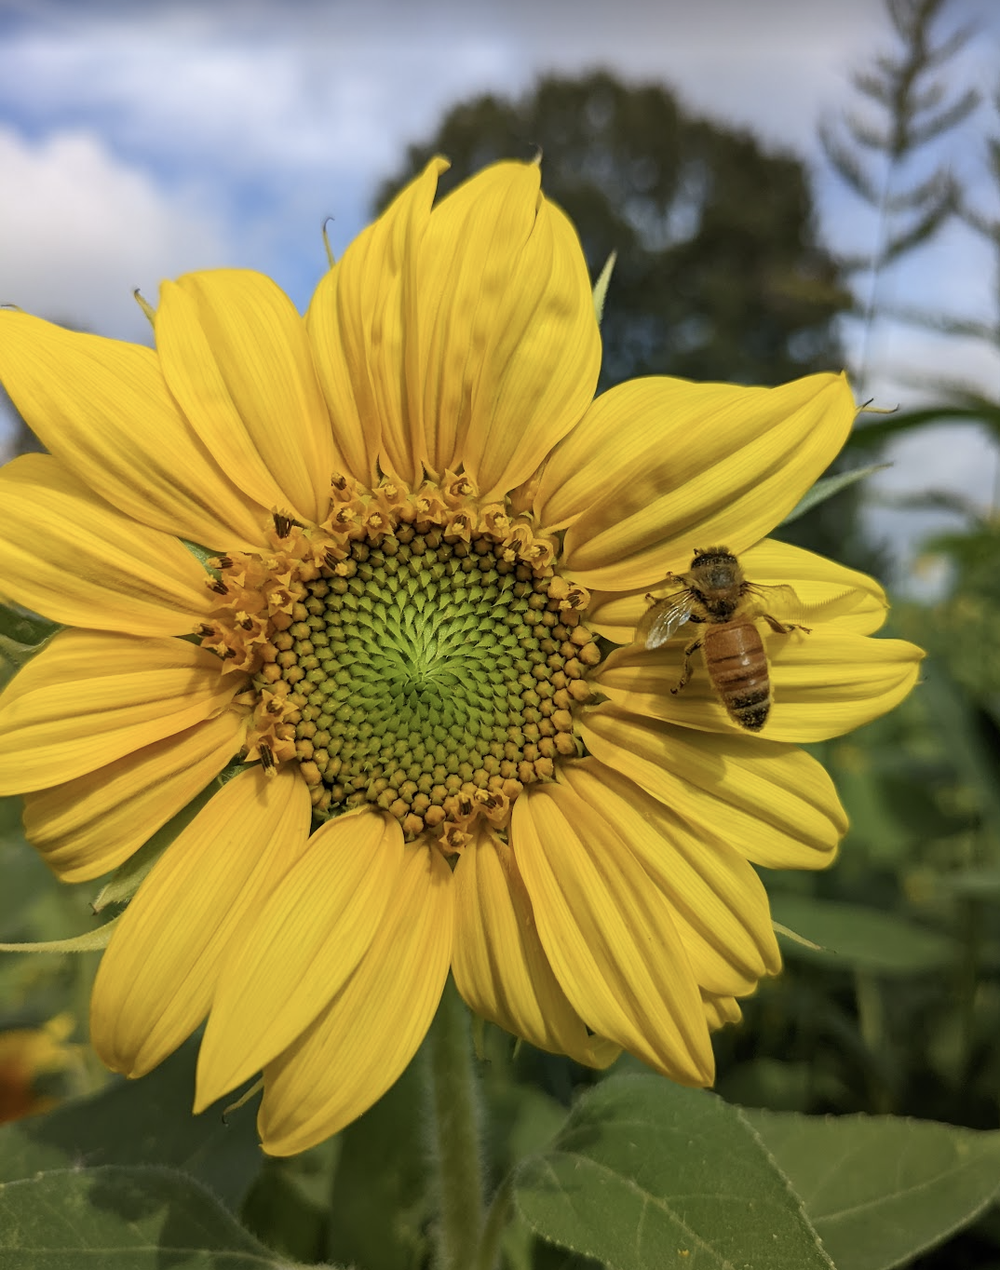 We grew four sunflower mazes this season and lots of u-cut sunflowers too. We also had lots of bees. There are 500 species that live on Sauvie Island (only four of those sting).